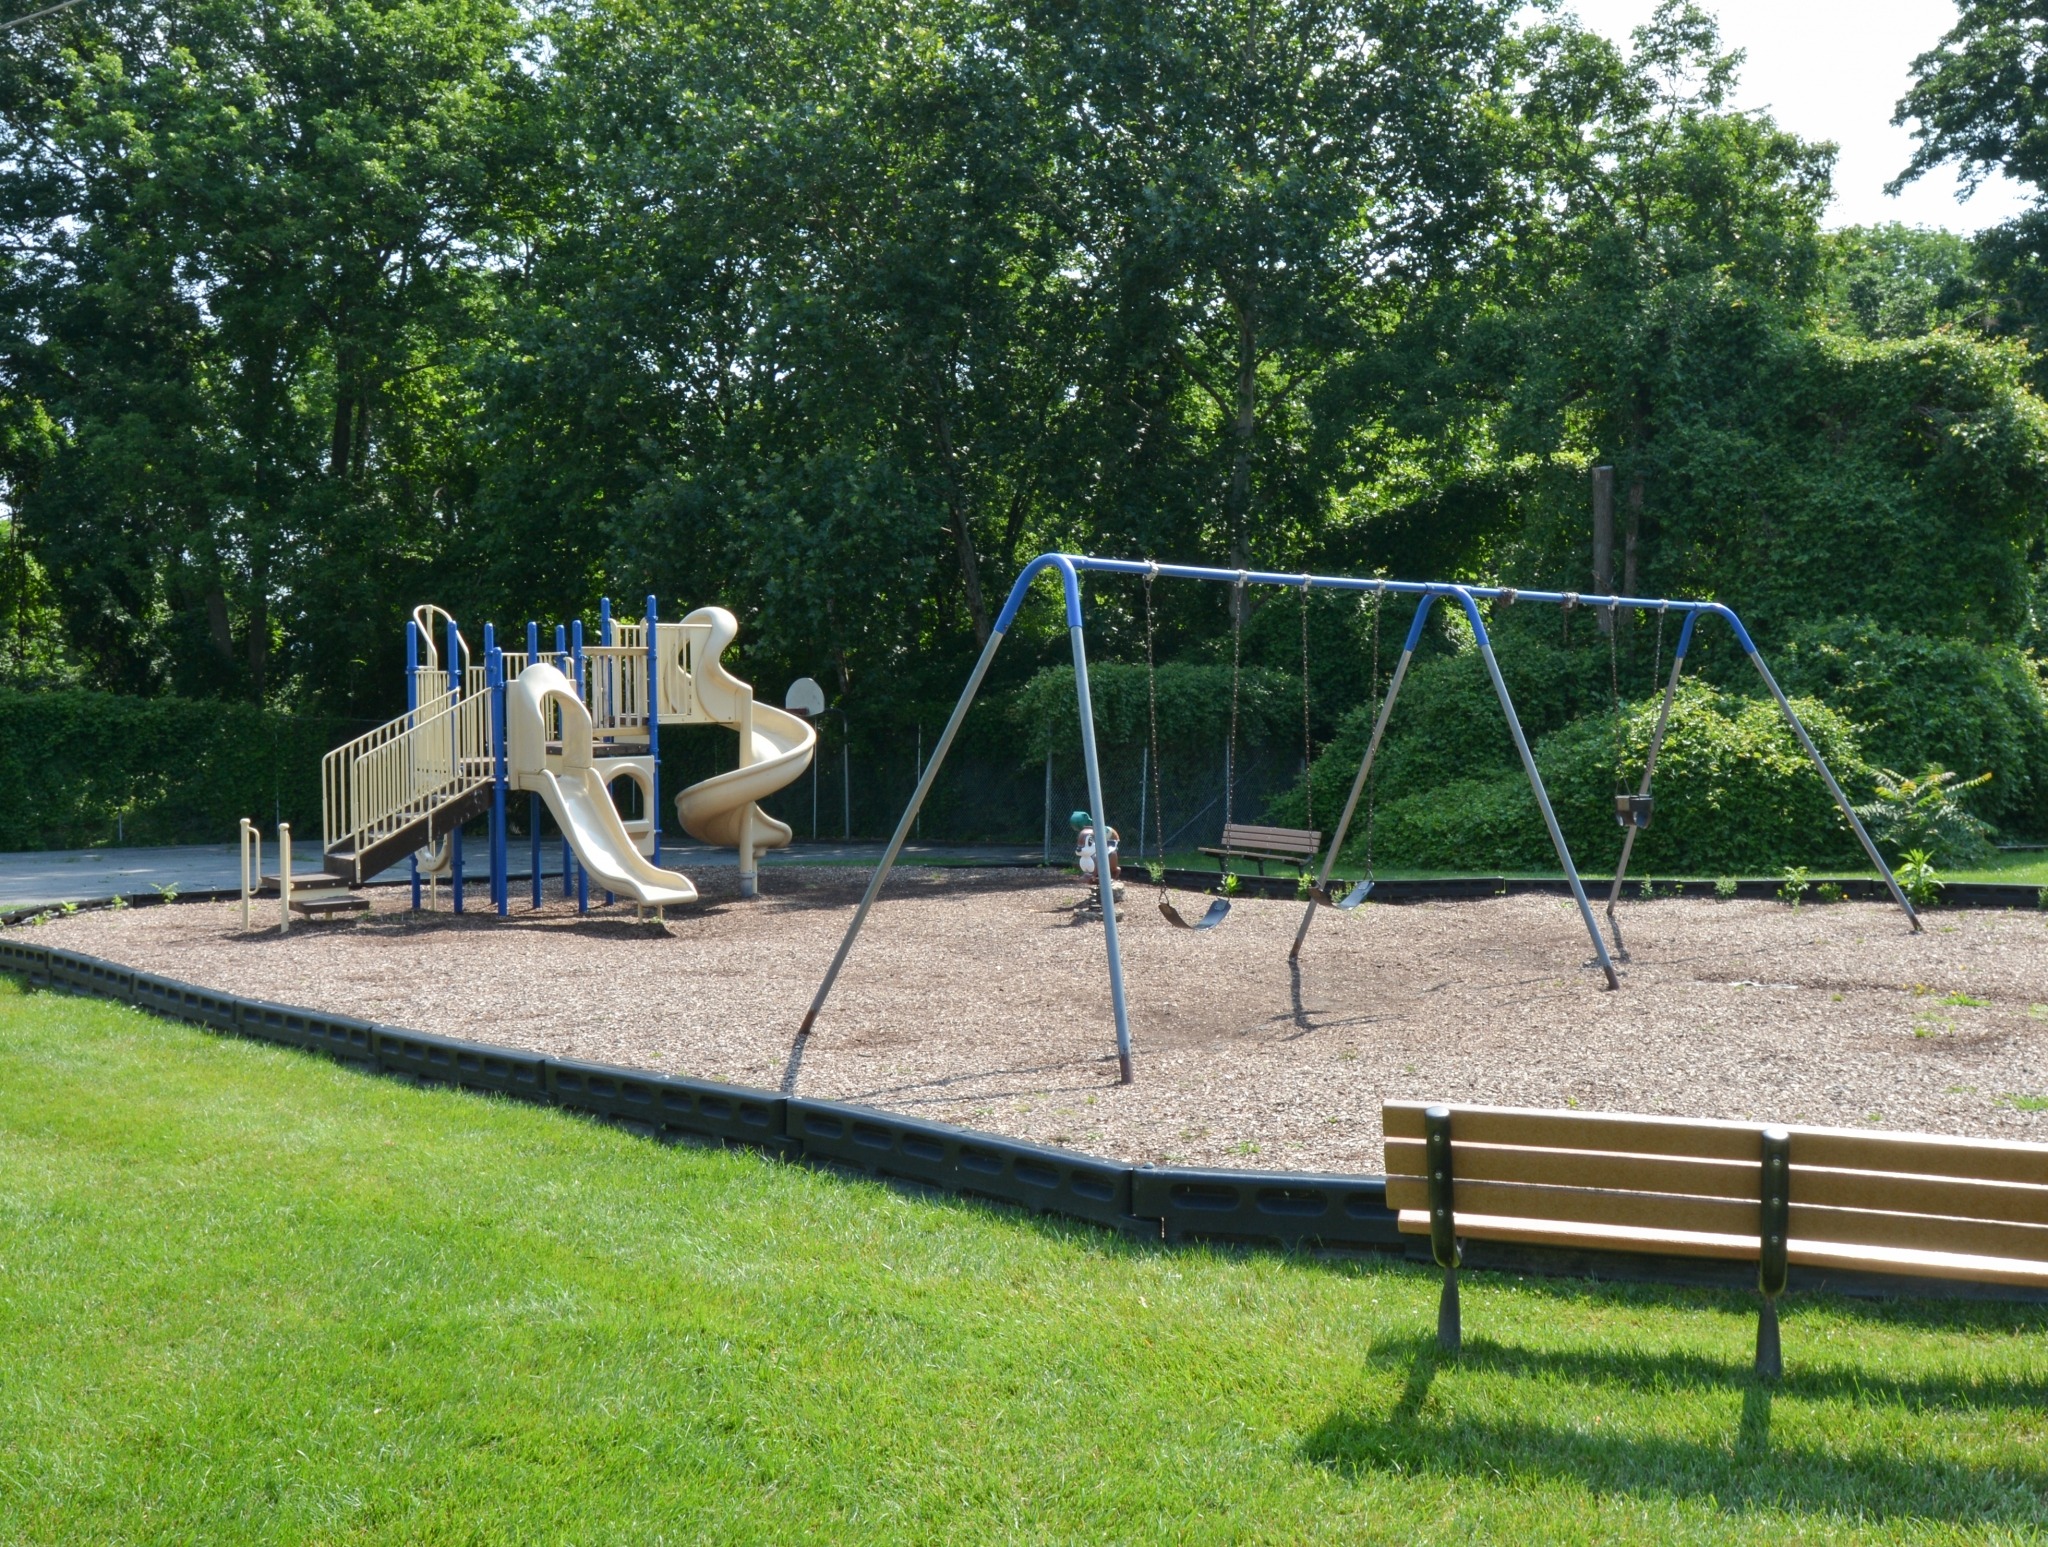 Outdoor playground on mulch surrounded by grass.